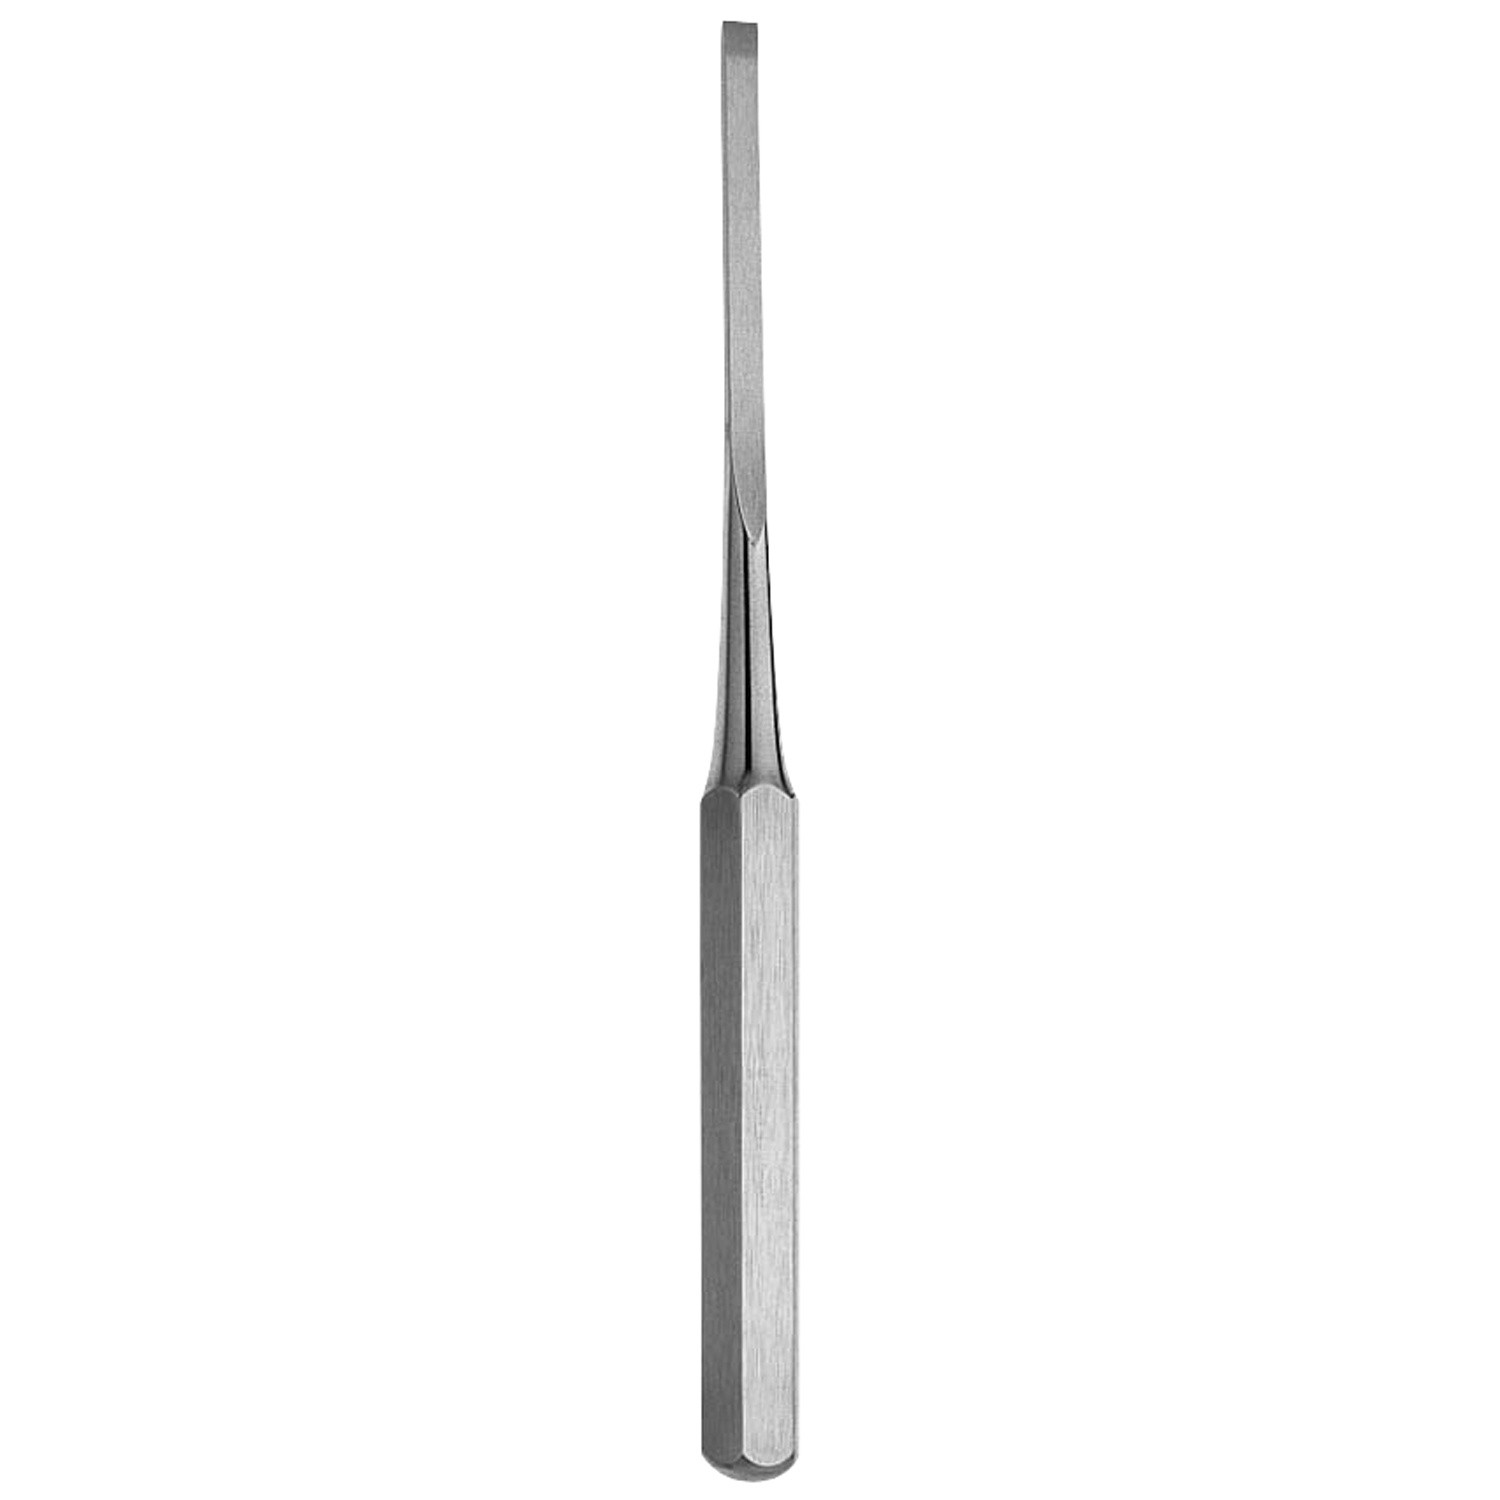 Hibbs Osteotome, 9 1/2" (24.0 Cm), Curved, 1 1/2" (38.0 Mm)